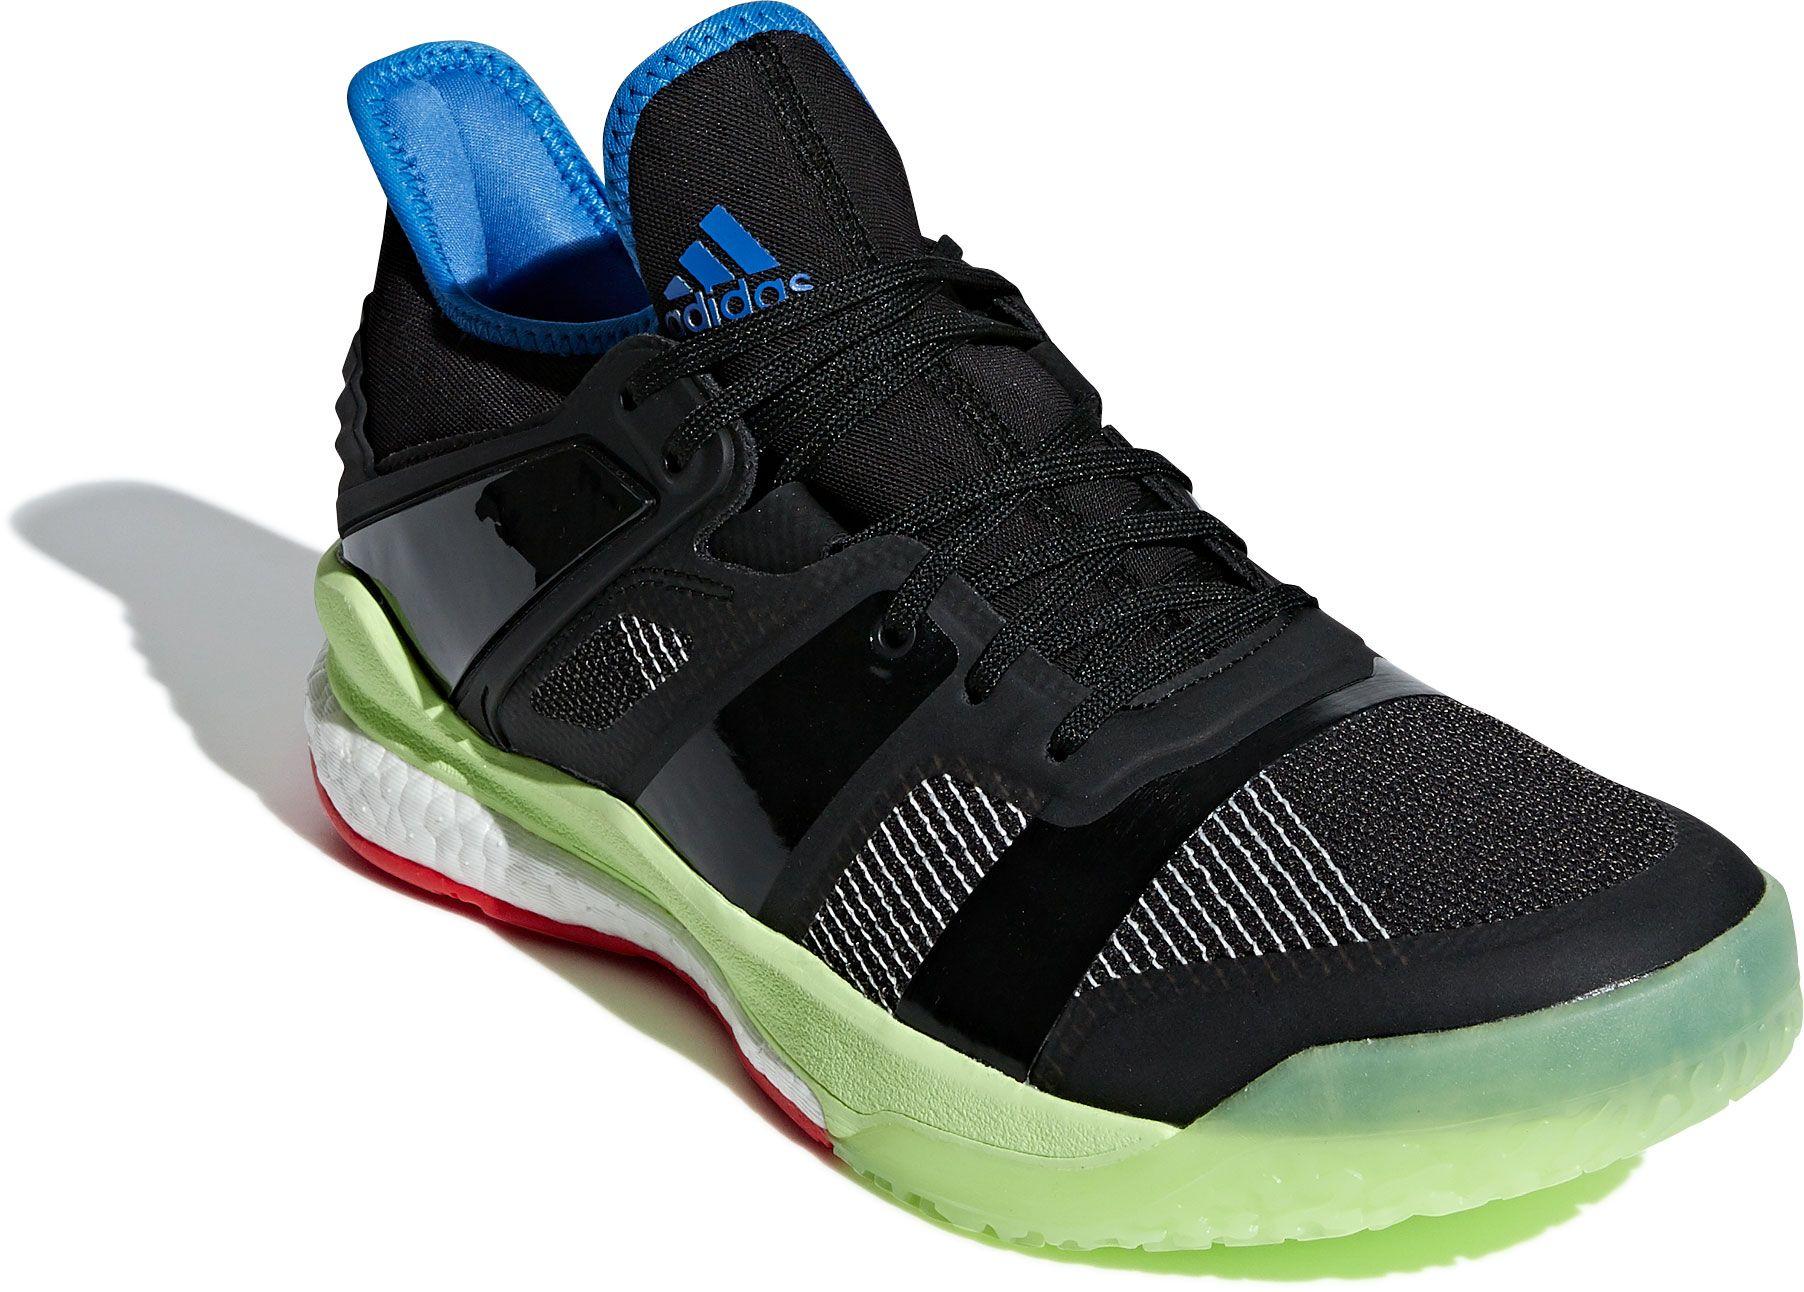 adidas men's stabil x volleyball shoe